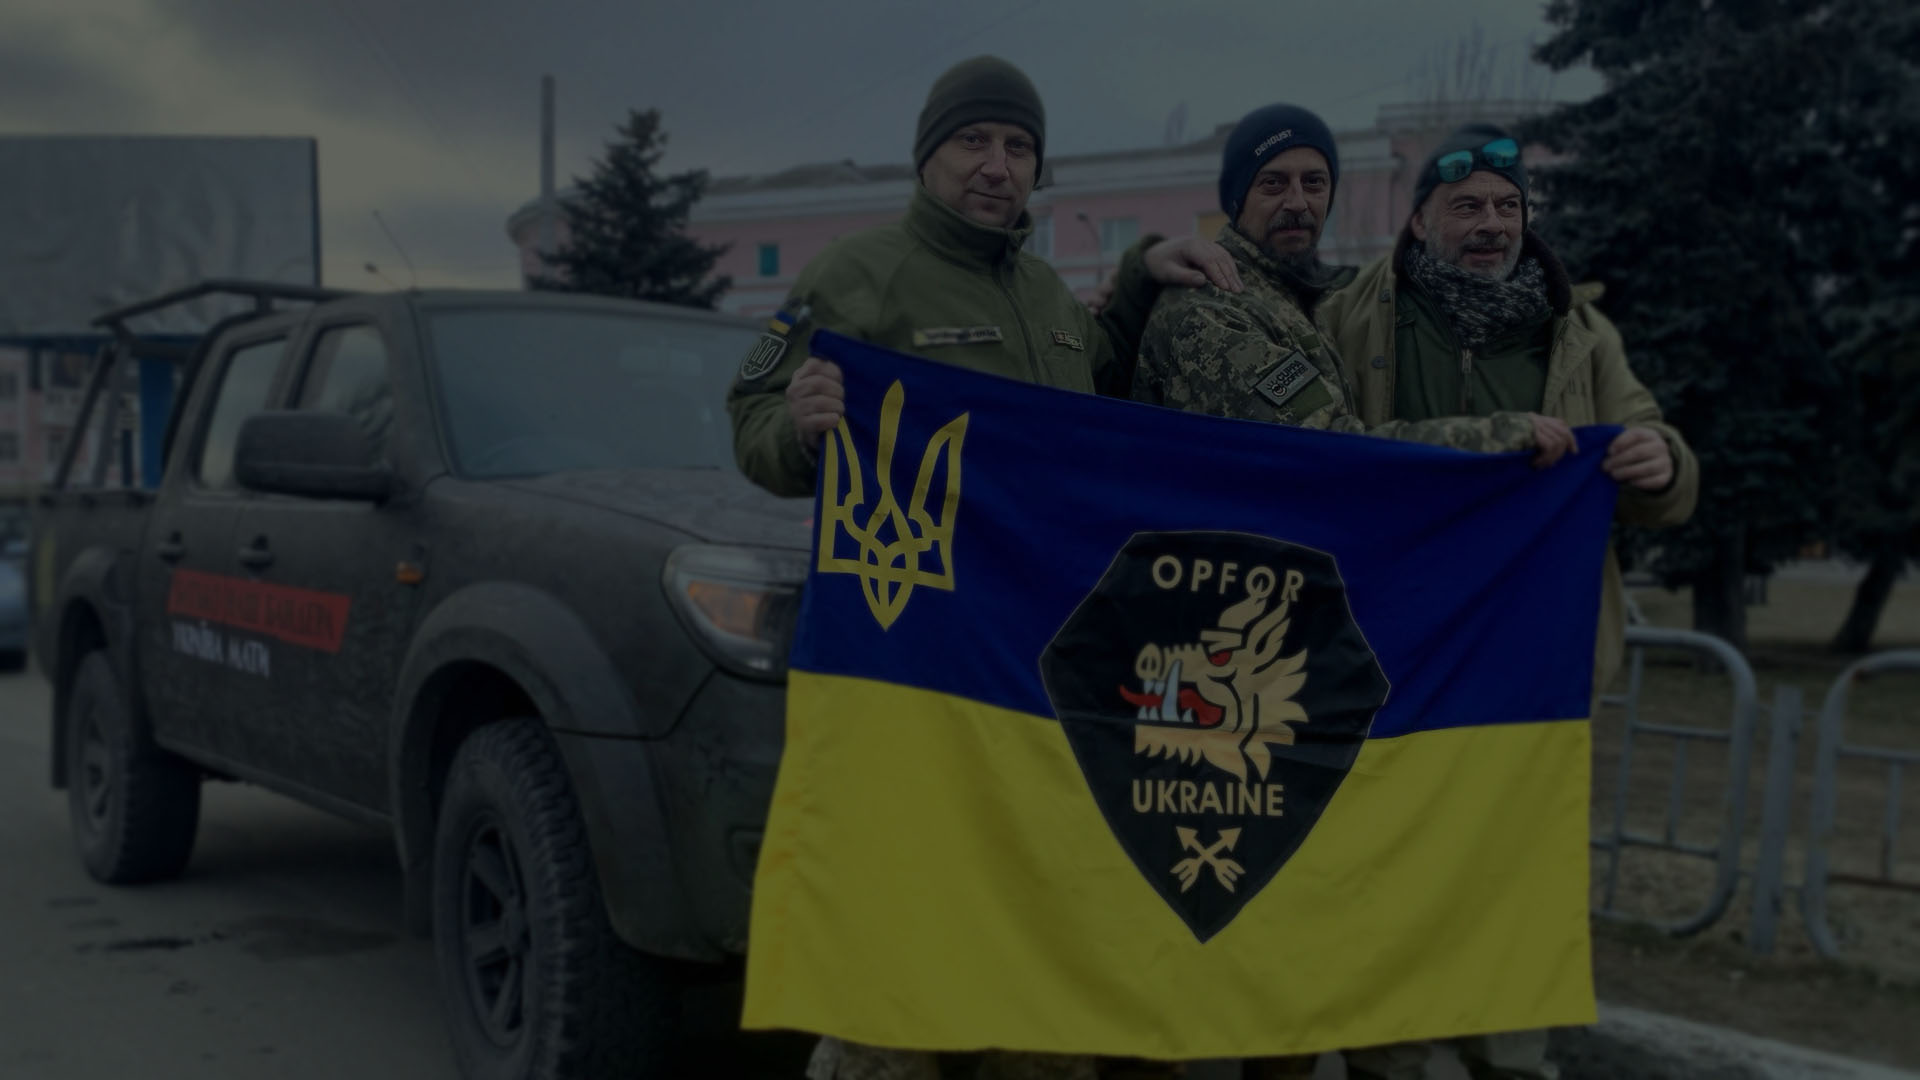 Two UA soldiers from OPFOR and Adam hold the Ukrainian flag in front of the militarized pickup truck.